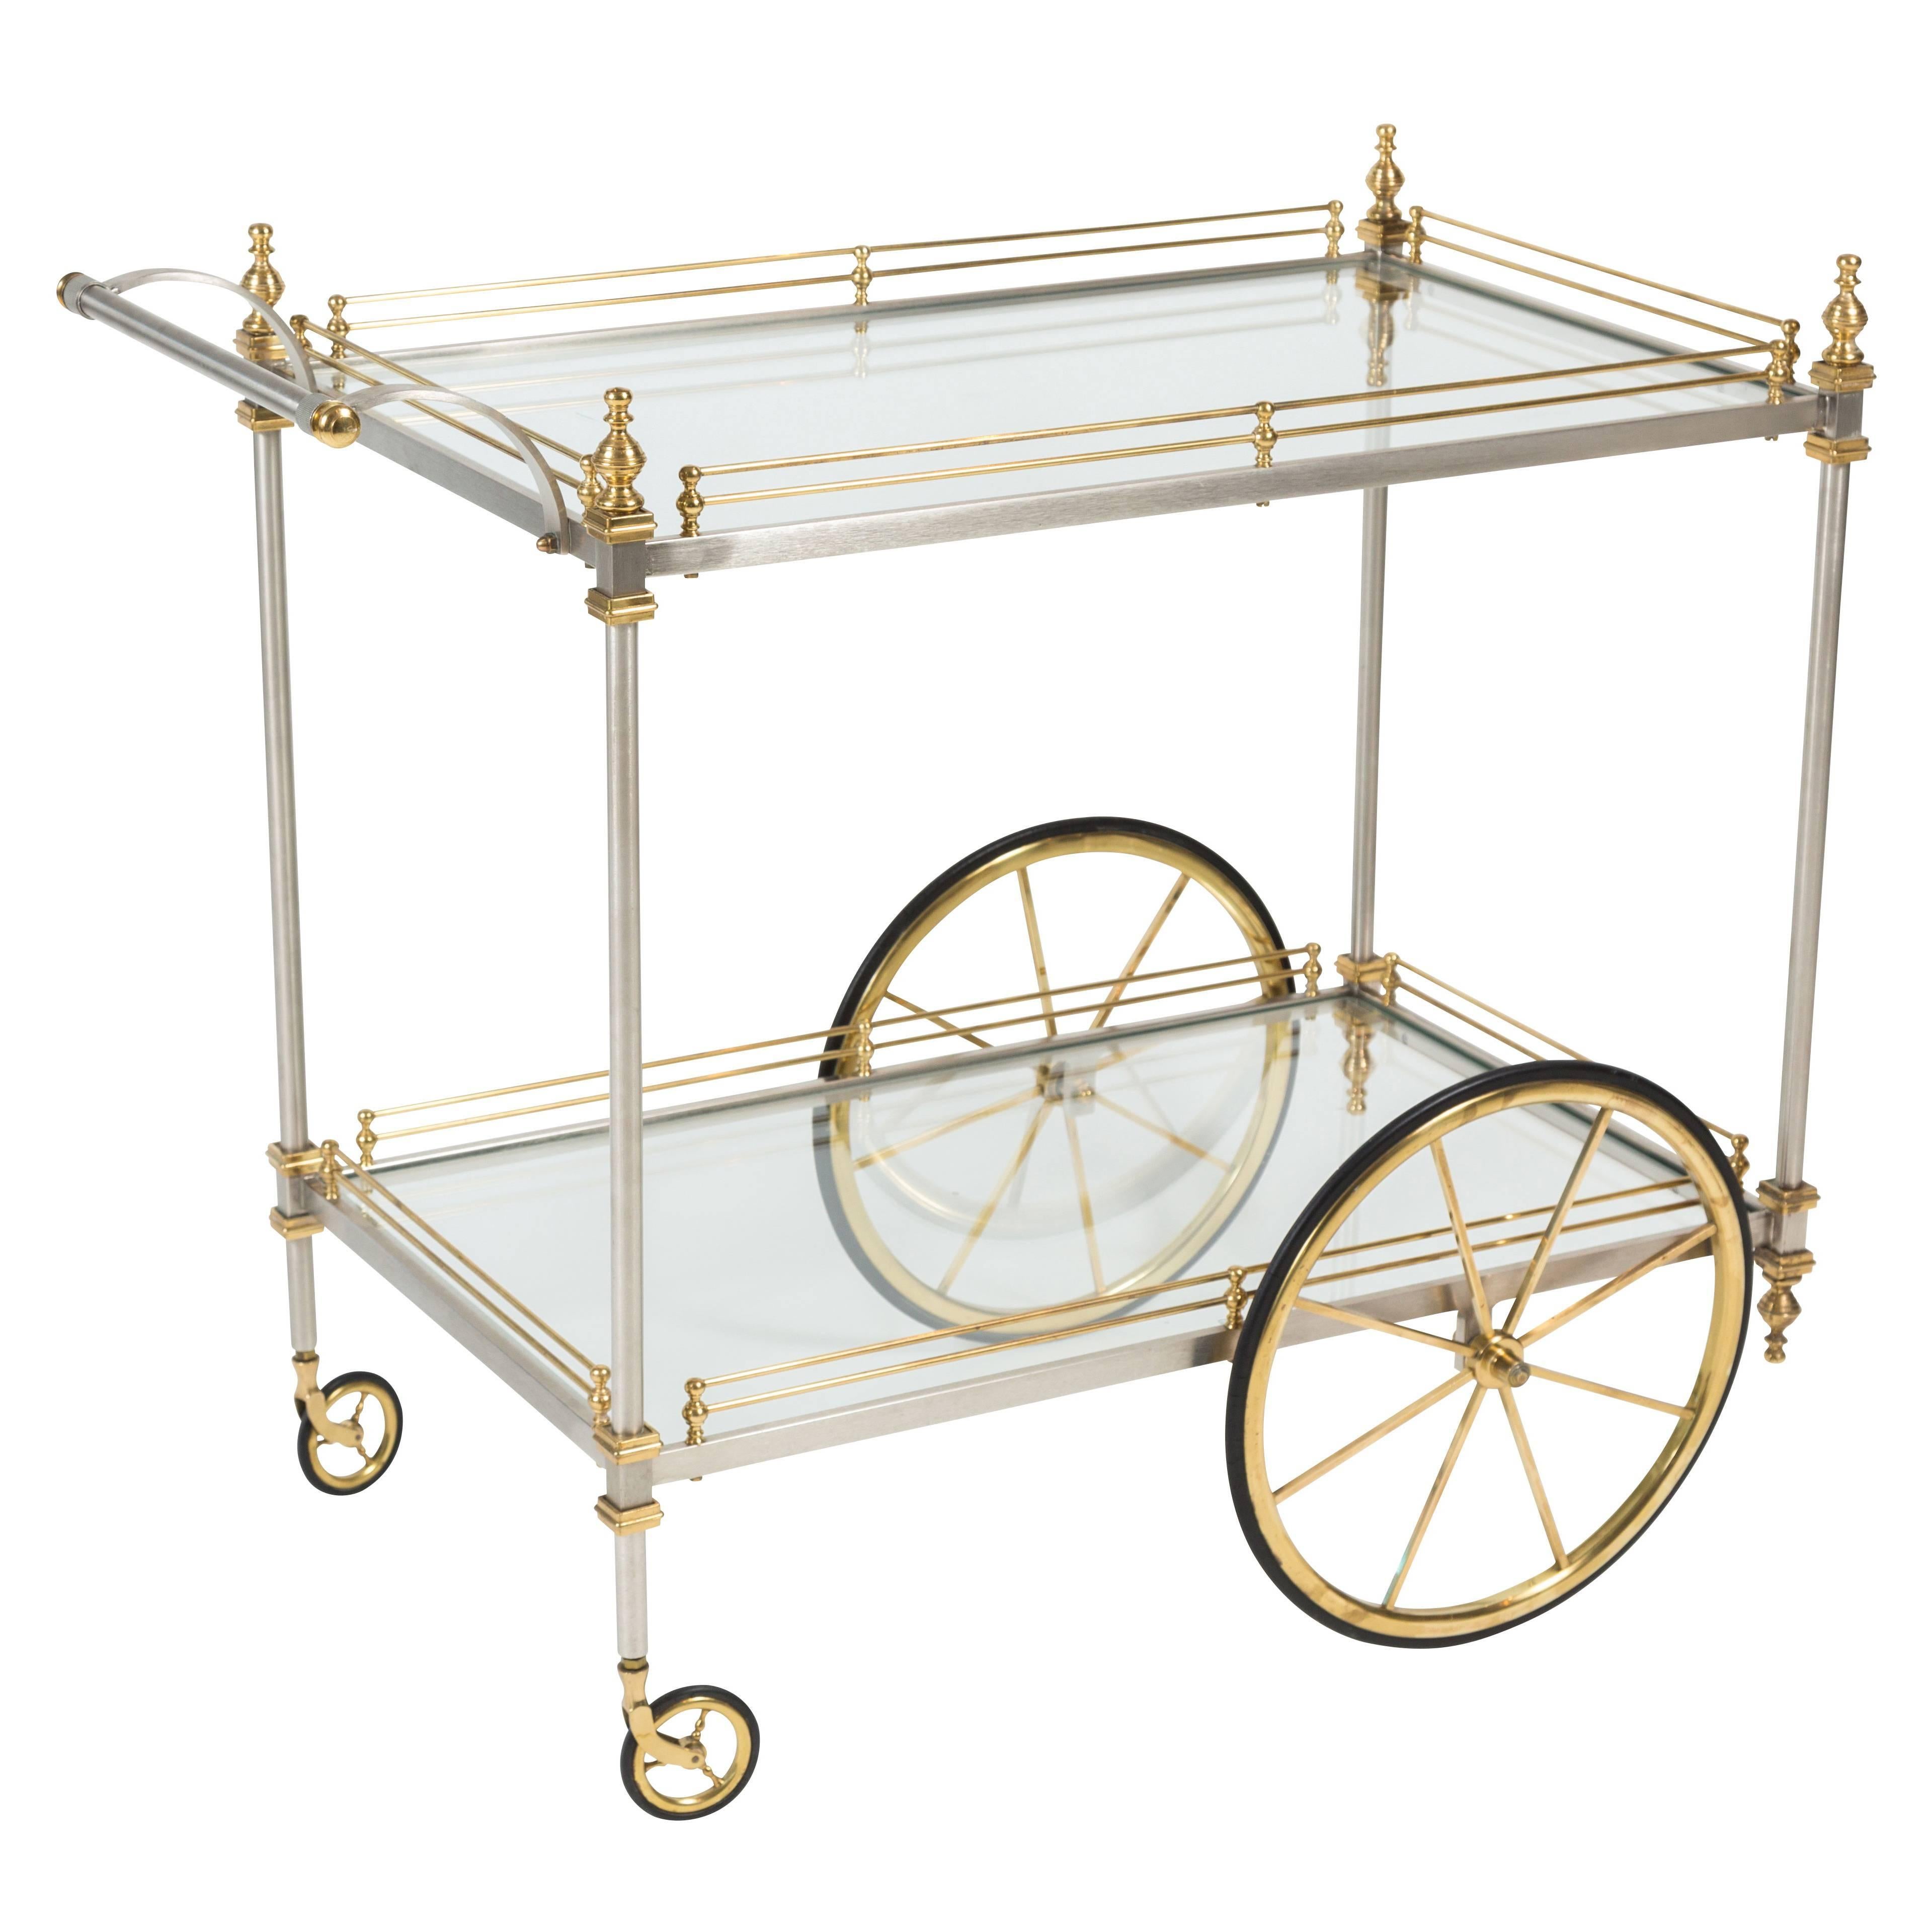 Chic Metal and Brass Tiered Drinks Trolley